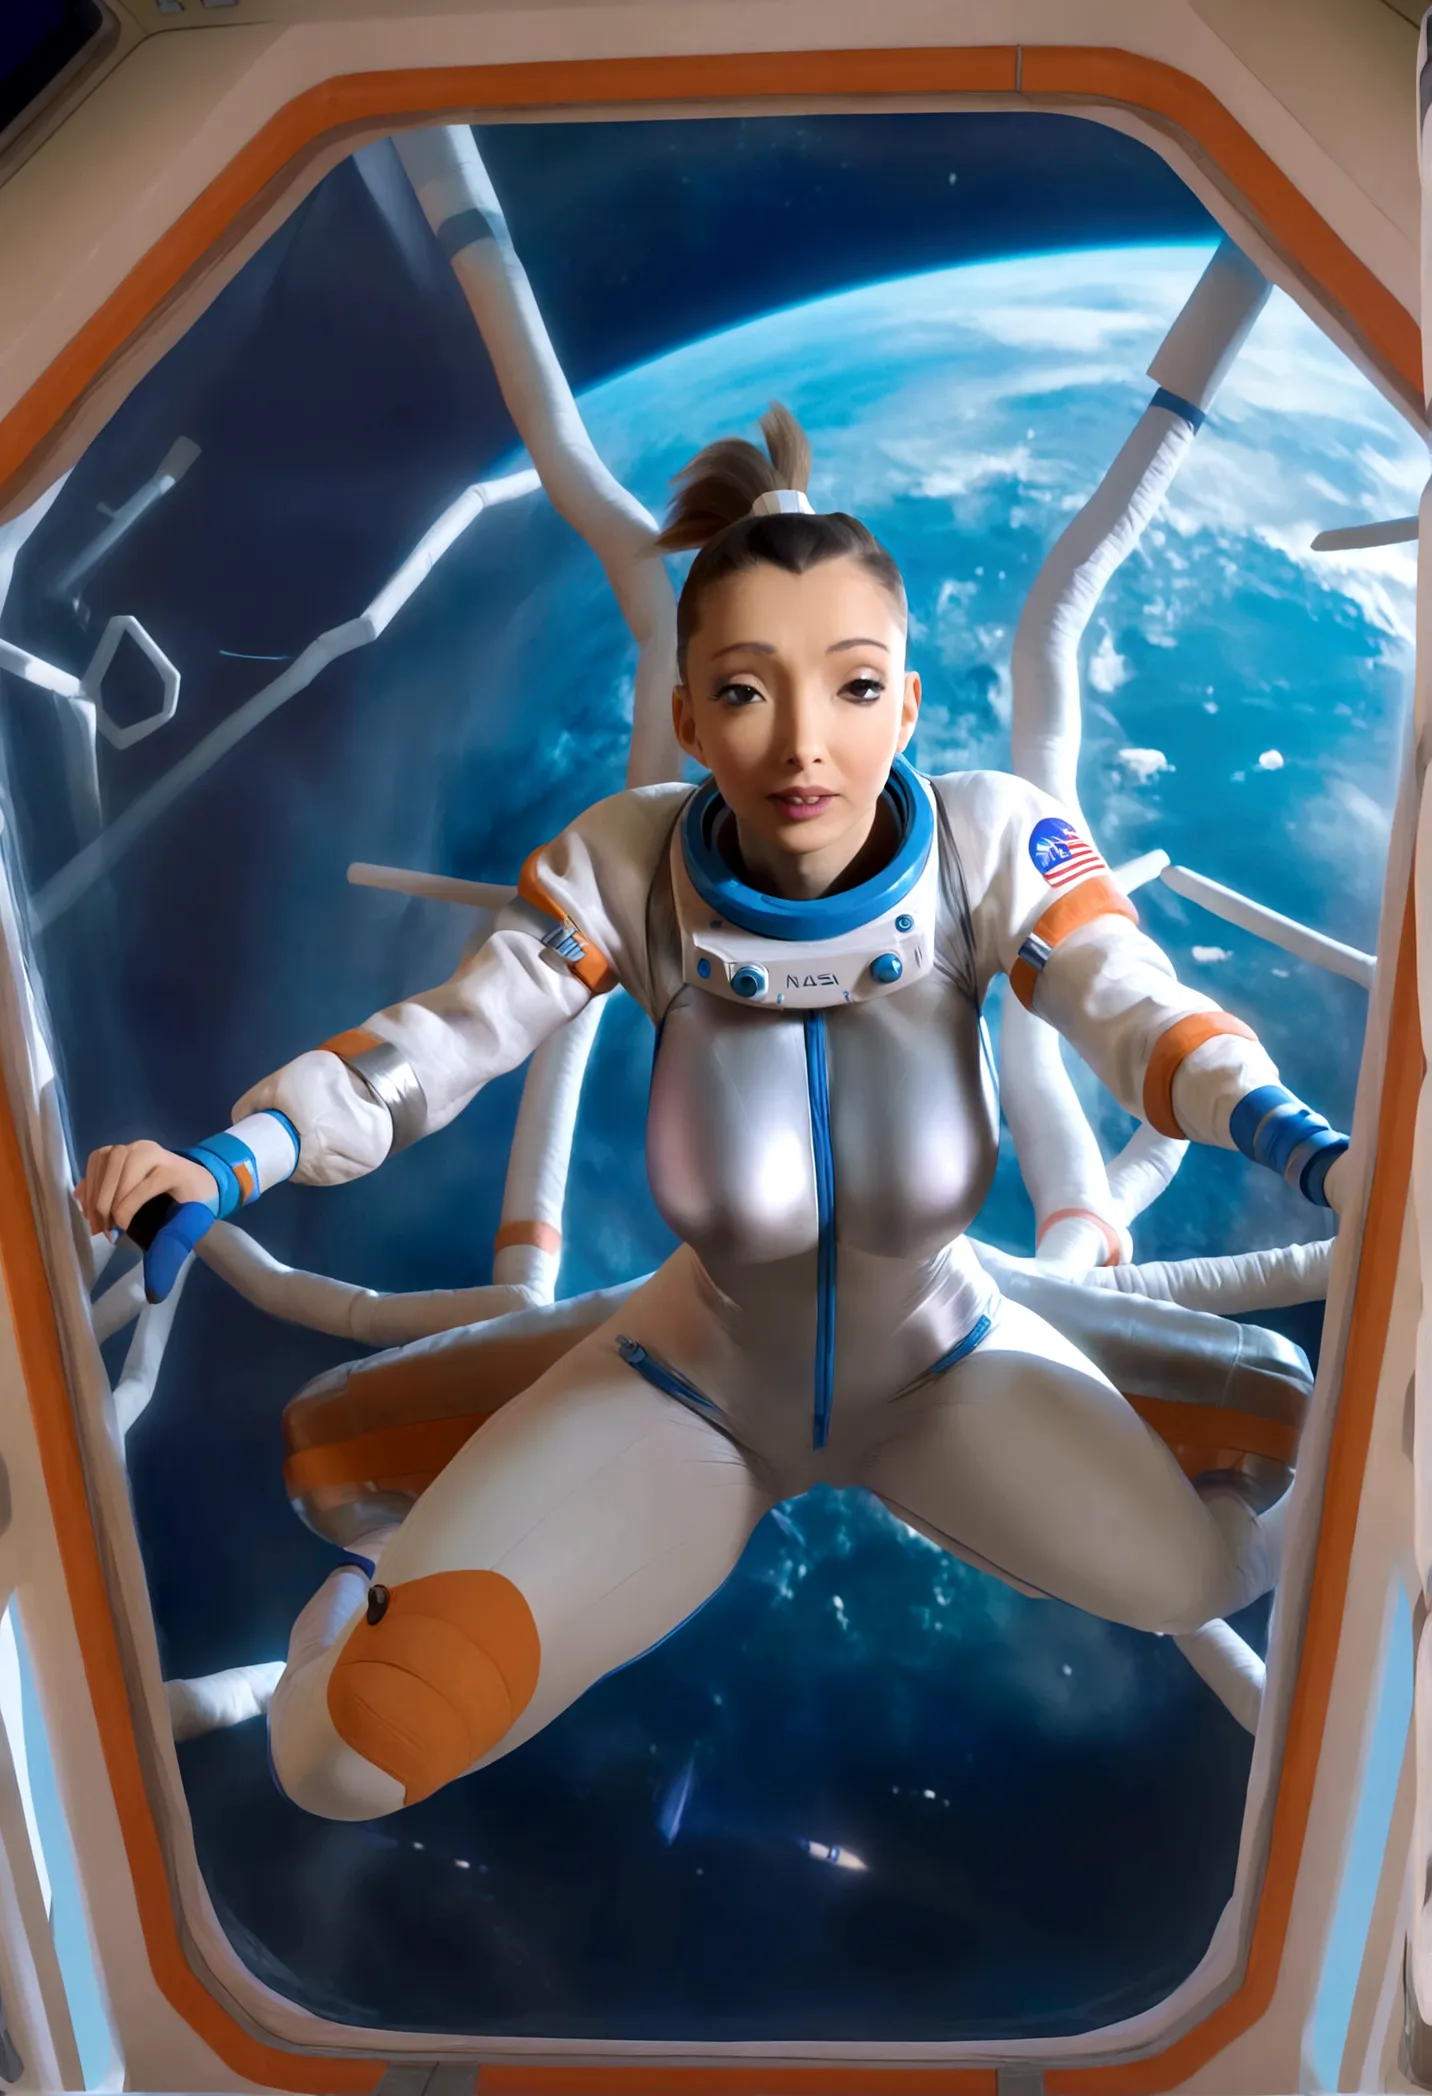 a cute woman in a nasa skin suit with a tight hairdo navigating a cramped zero gravity space station, checking instruments, high...